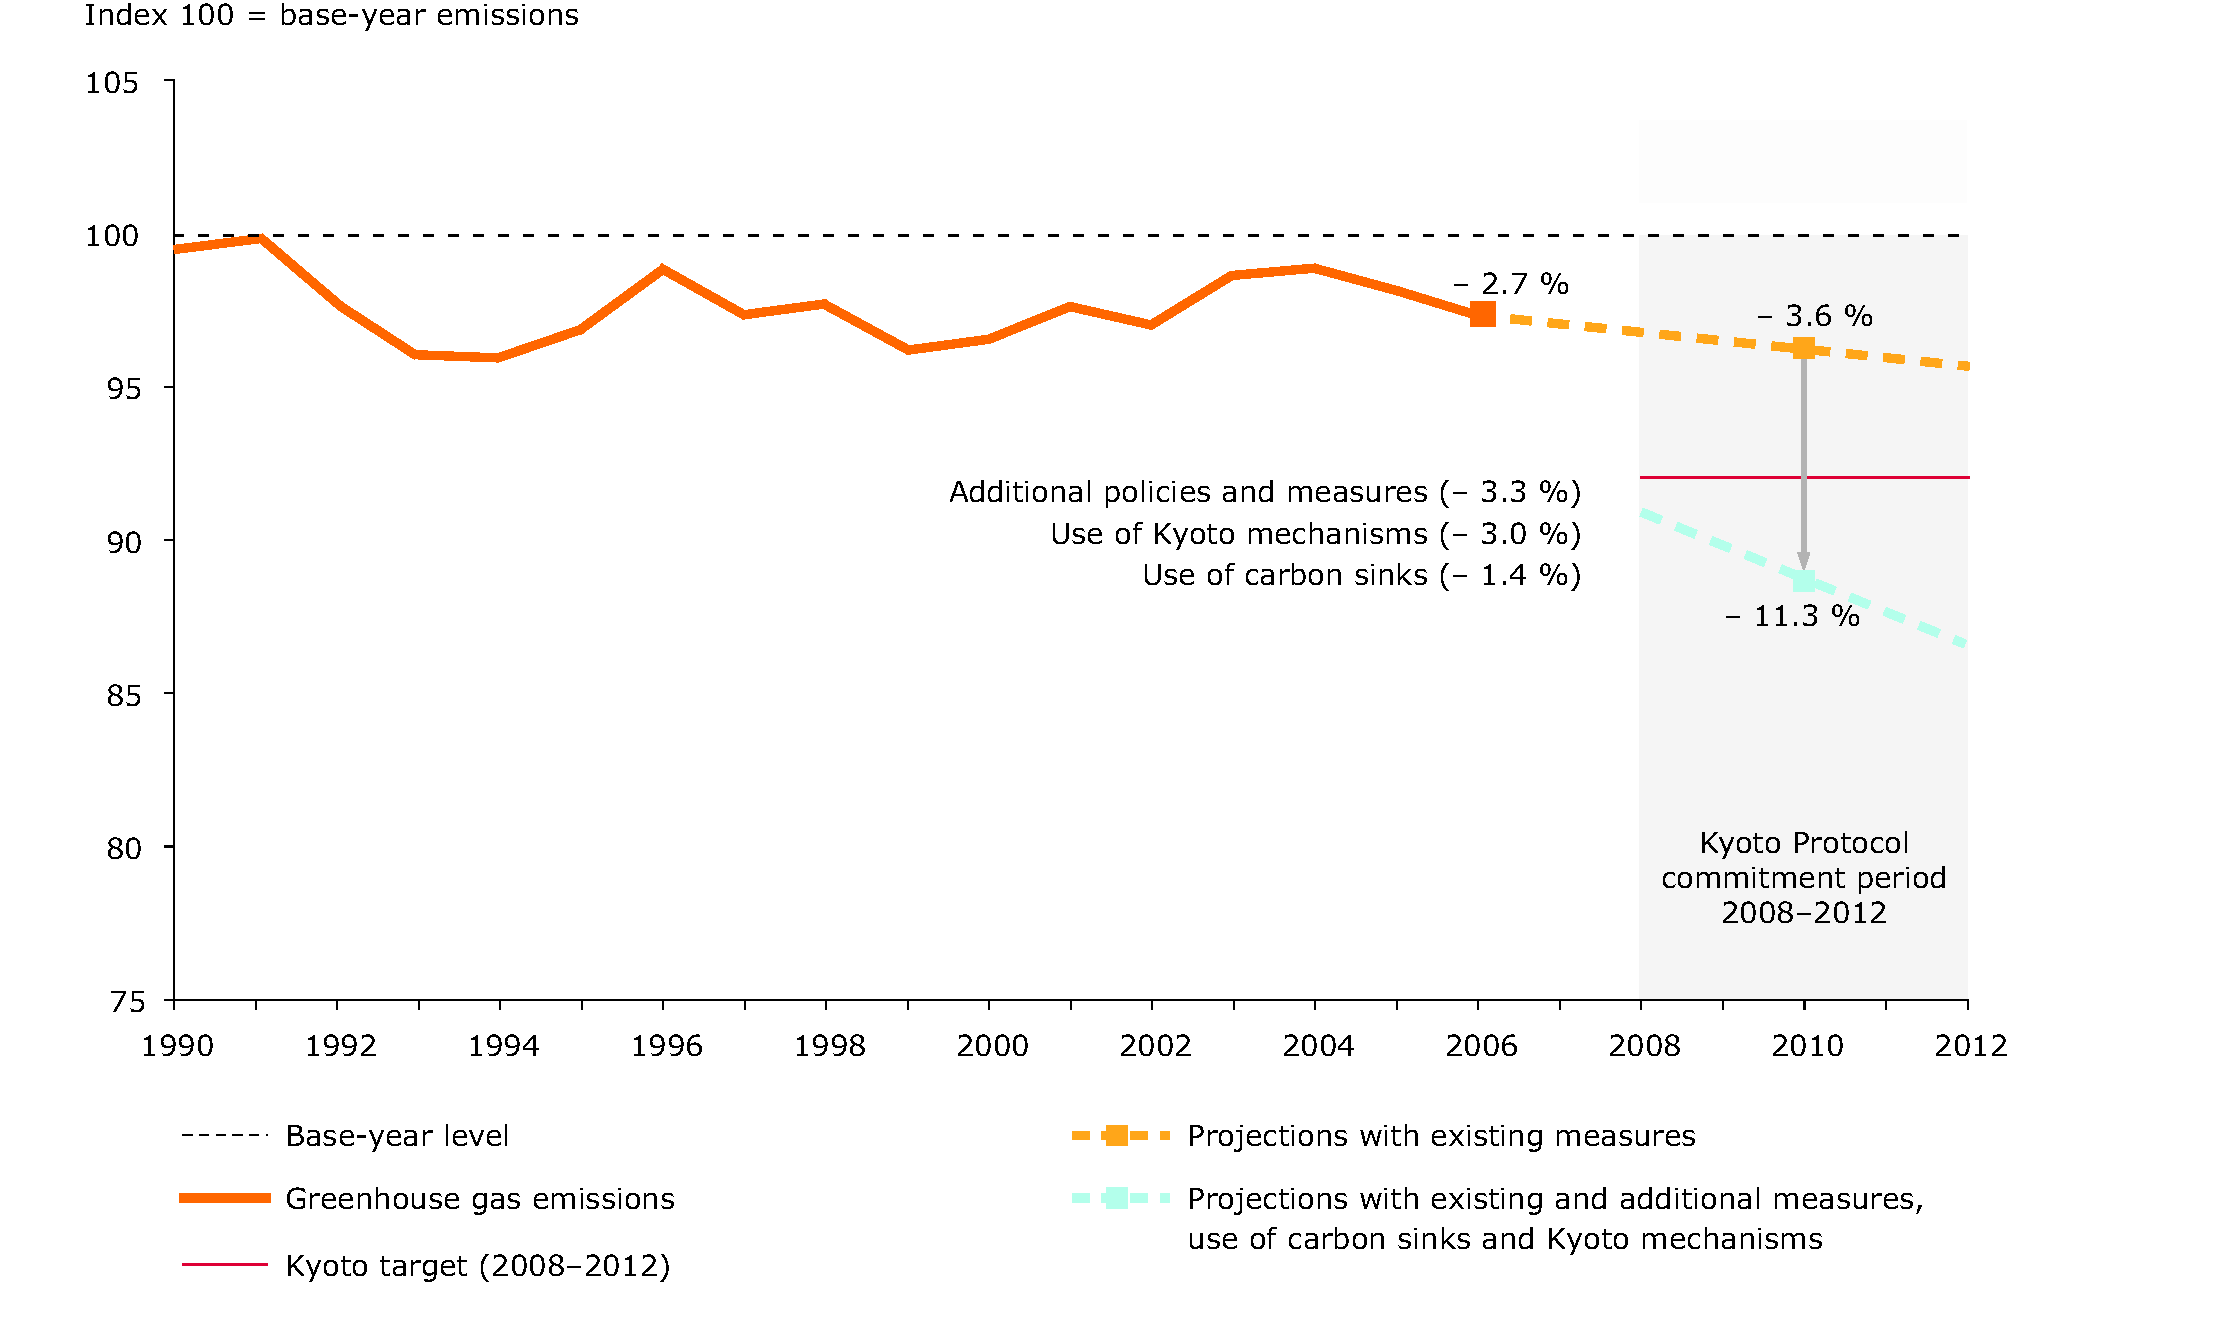 EU-15 greenhouse gas emissions and projections for the Kyoto period 2008-2012